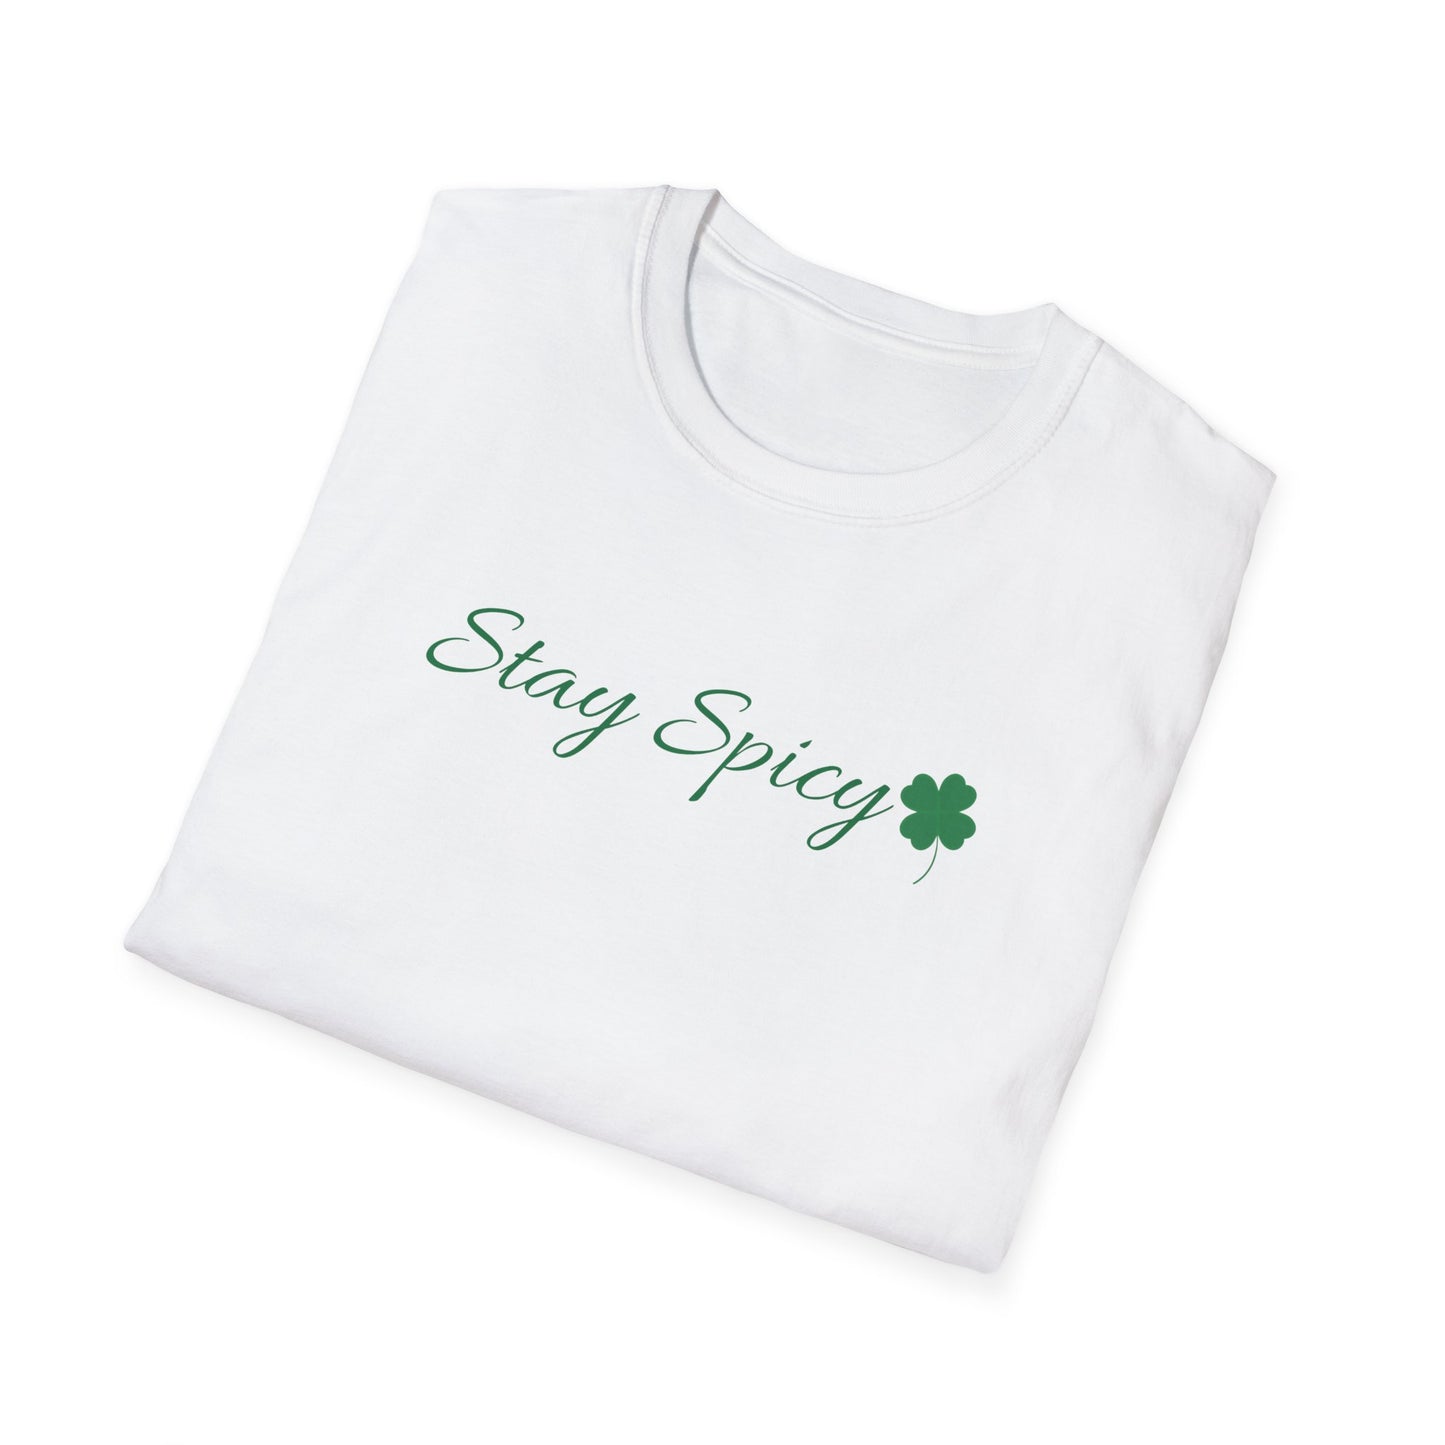 Stay Spicy St. Patrick's Day T-Shirt